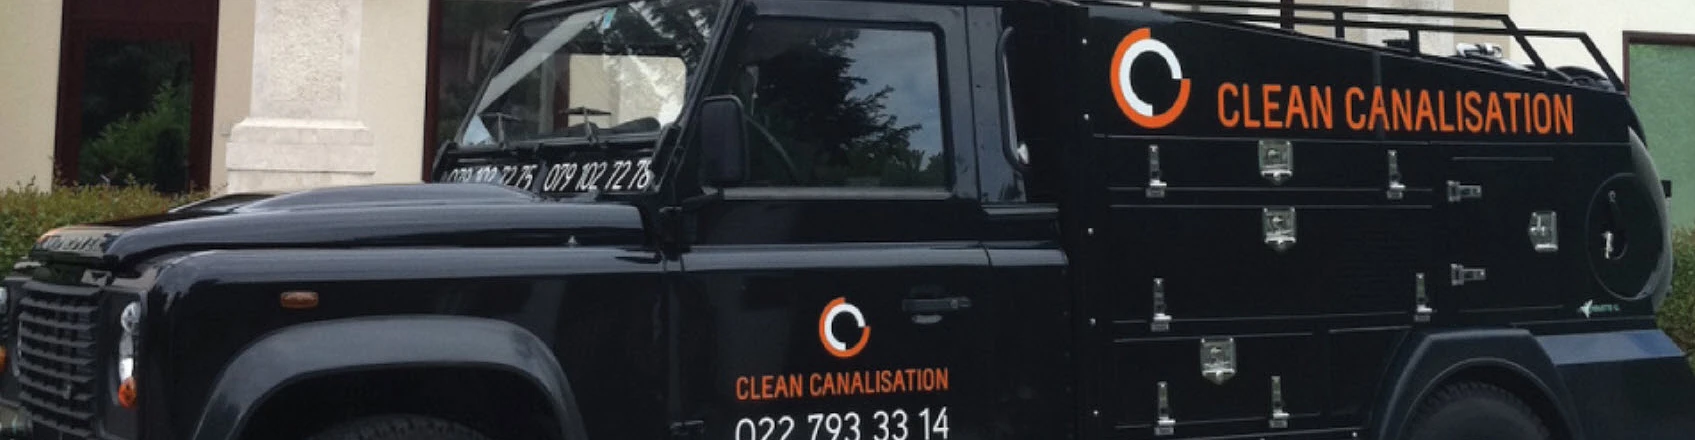 Clean Canalisation